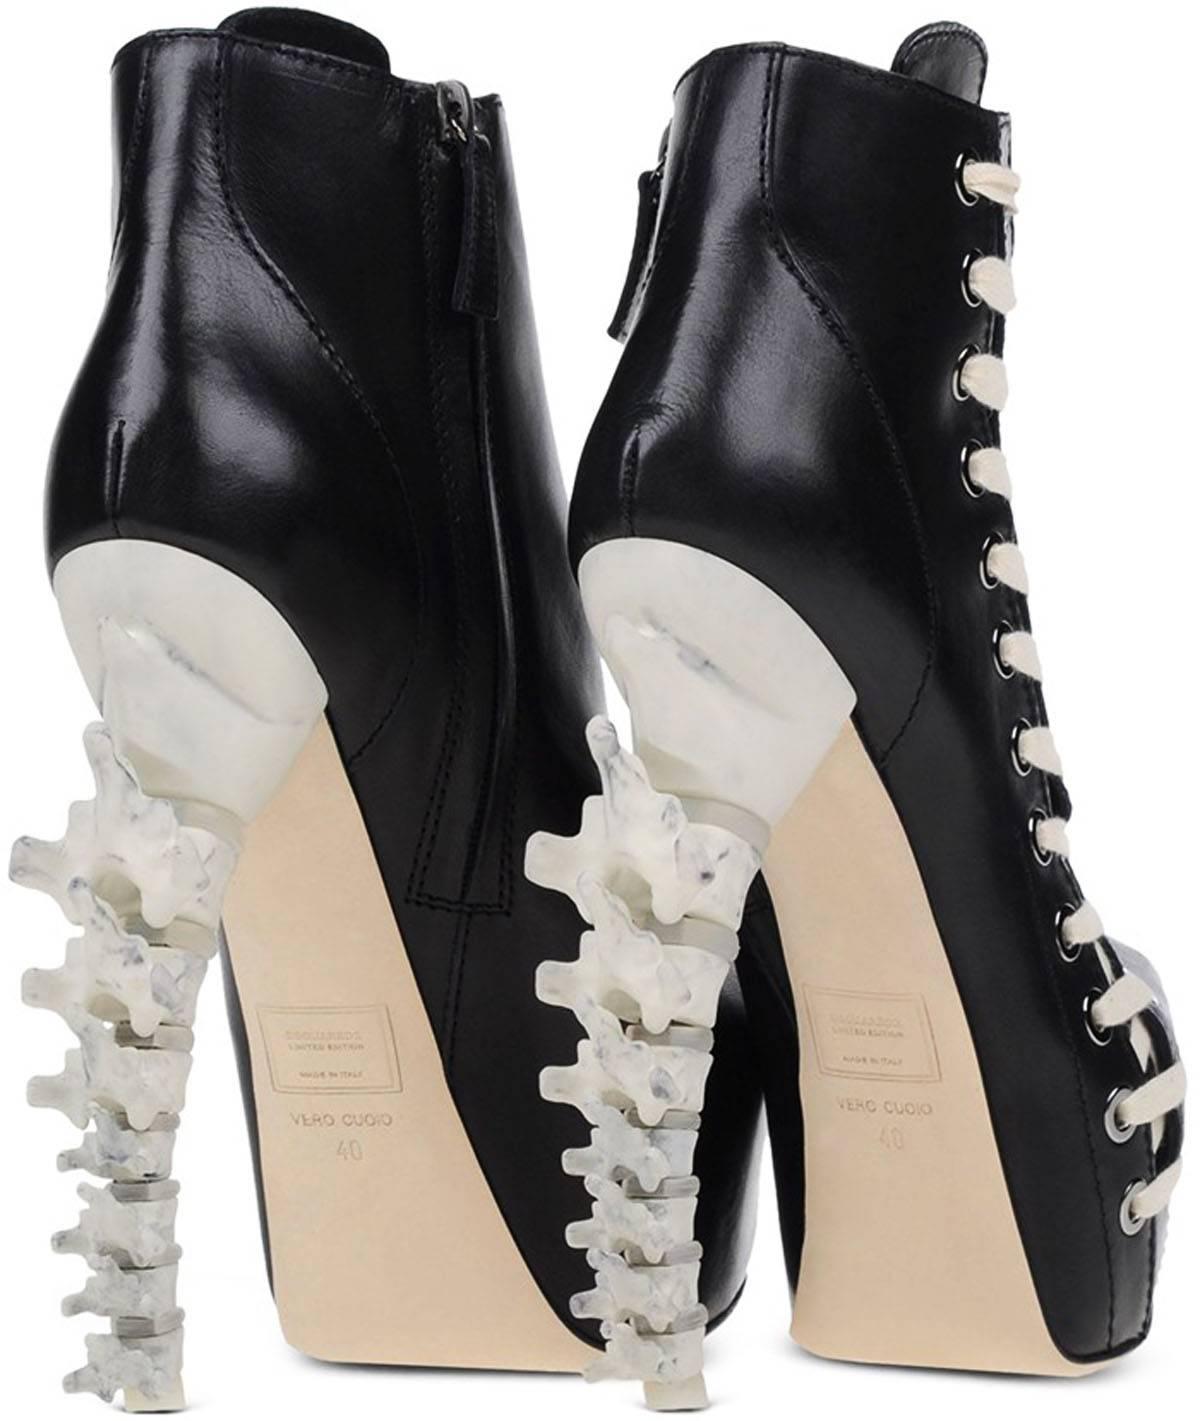 New Dsquared2 Limited Edition Icon Spine Heel Leather Ankle Booties
 Italian size 36 - US 6
 Color - Black
 100% Leather
 Faux Laces Along the Side
 Zip Closure on Side
 Hidden Platform - 2 inches
 Faux Bone Heel - 6 inches
 Shaft - 5.5 inches
